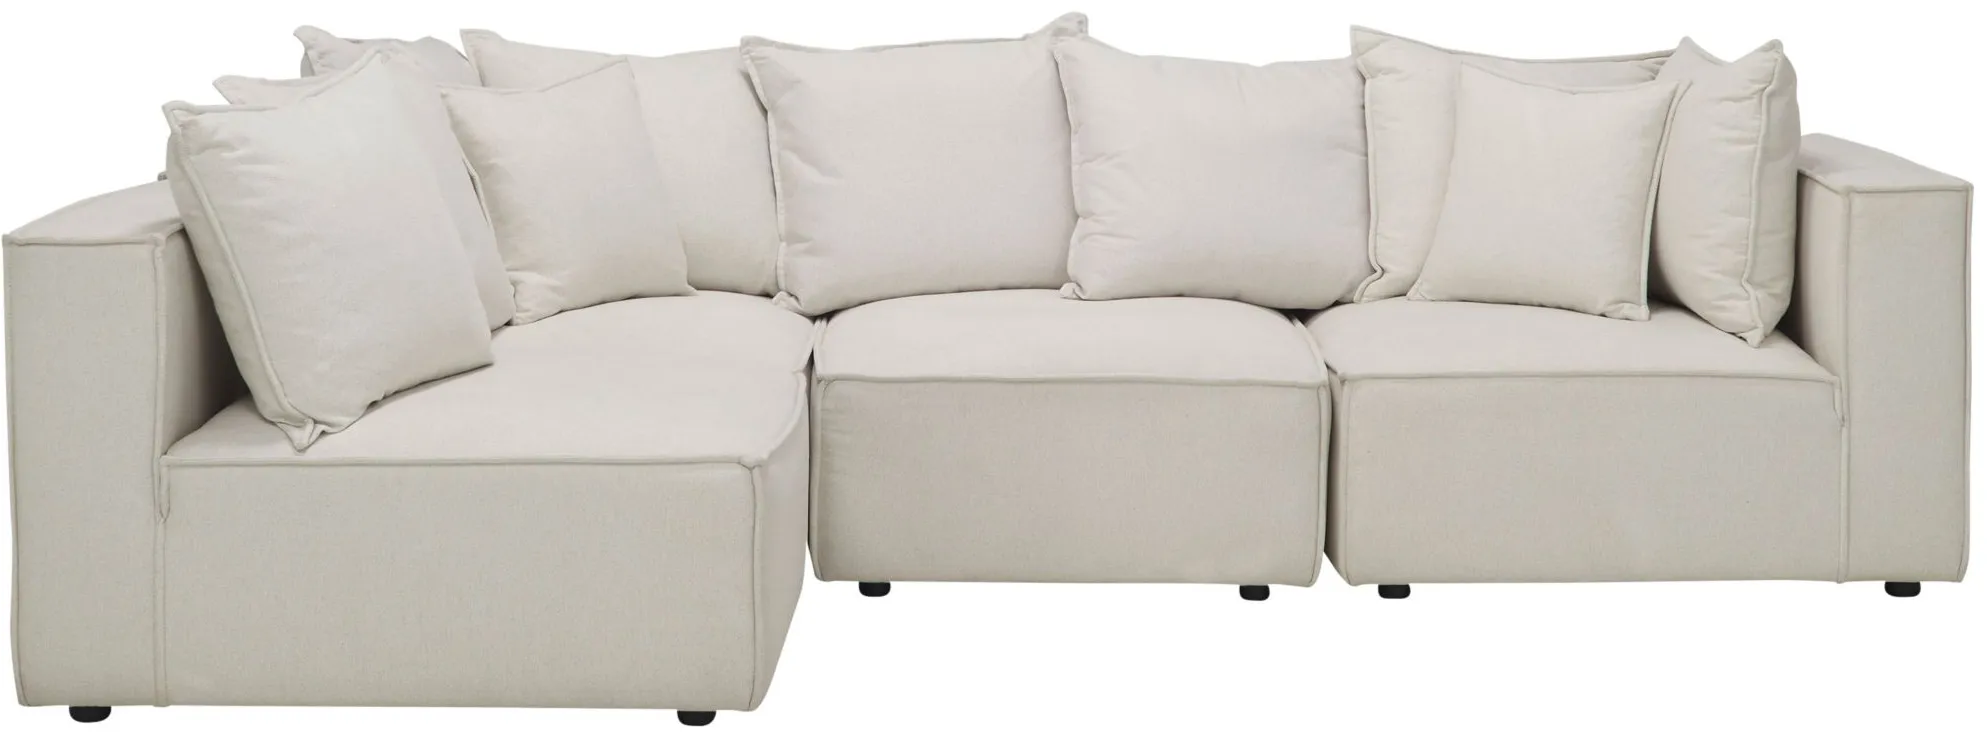 Loris Chenille 4-pc. Pit Sectional in White by Aria Designs